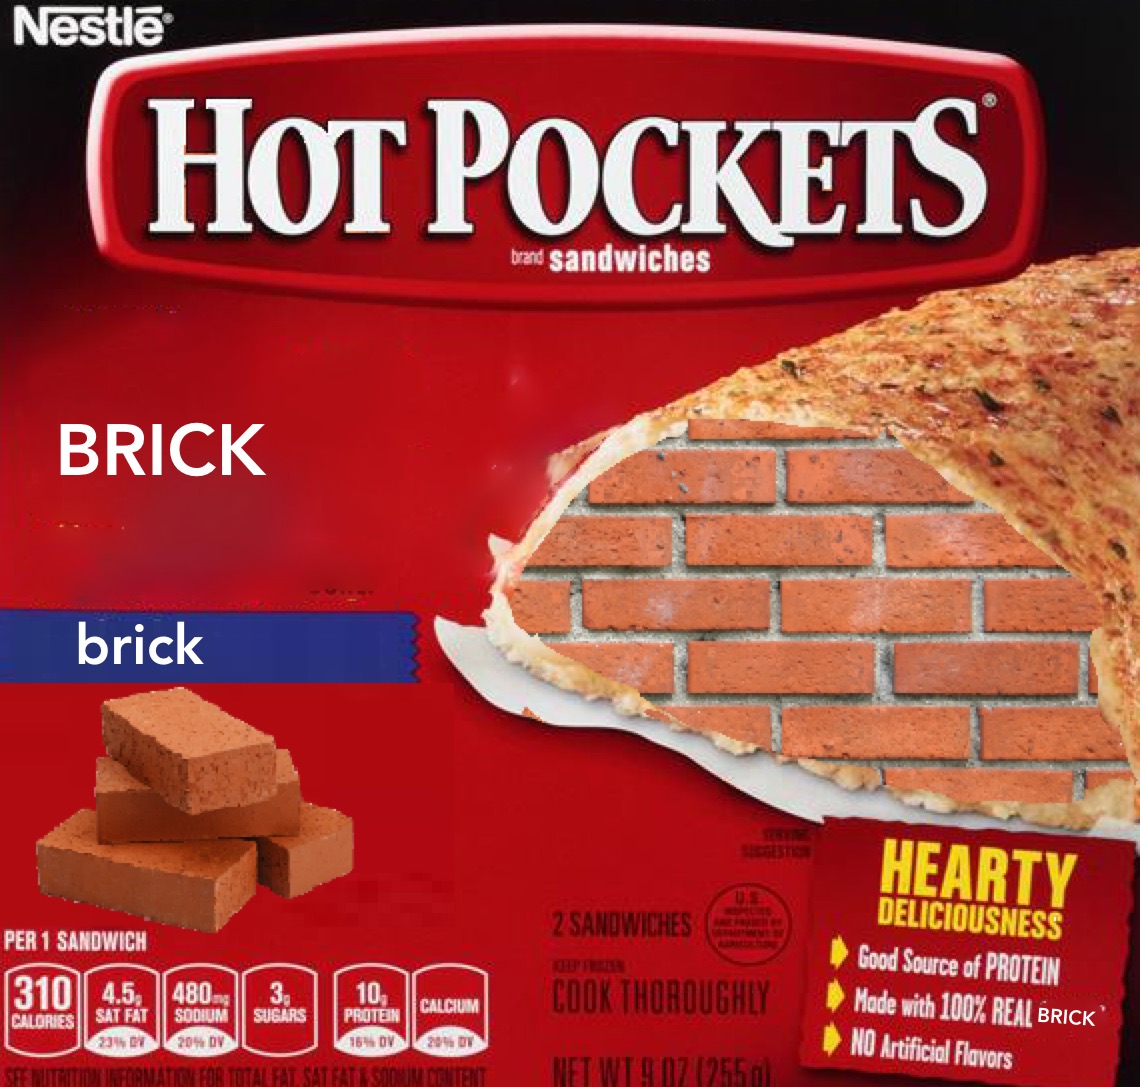 hot pockets - Nestle Hot Pockets brand sandwiches Brick brick Hearty Per 1 Sandwich 3104.5, Deliciousness Good Source of Protein Made with 100% Real Brick No Artificial Flavors 1480 2 Sandwiches Cook Thoroughly Net Wts 17 125501 Sicios Calories 10 Calcium